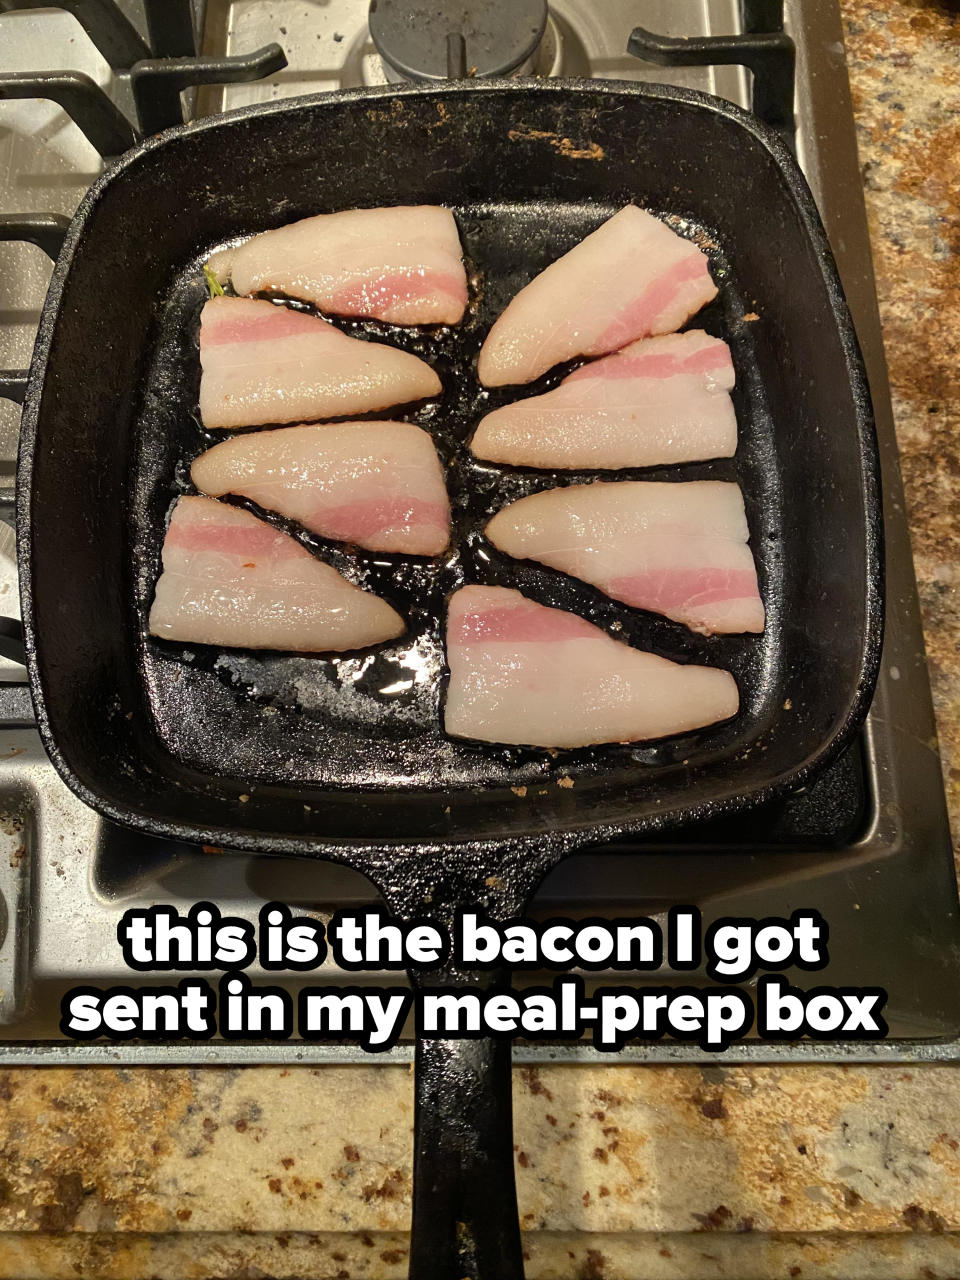 fatty bacon in a pan and the words "This is the bacon I got sent in my meal-prep box"